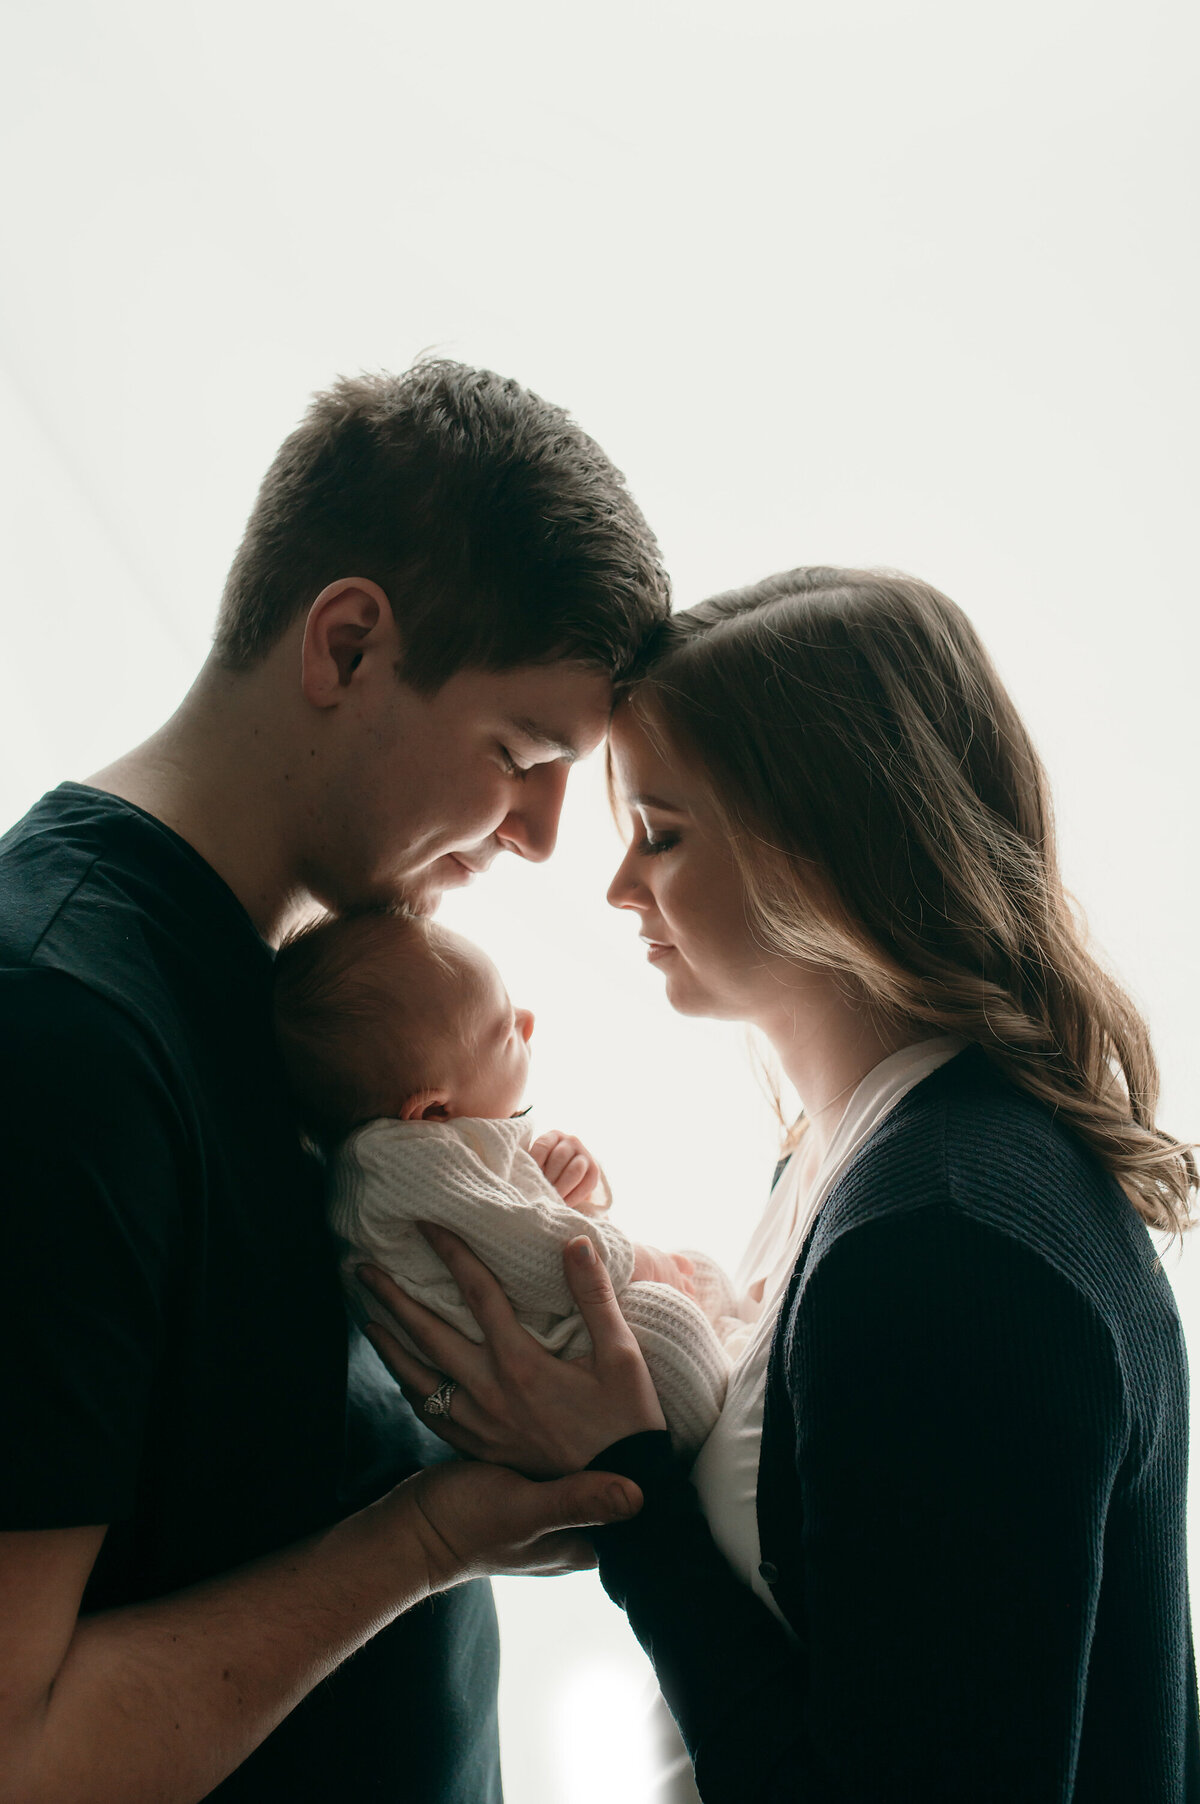 Portrait of Mom, Dad and infant shown in shadowed profile in front of a bright, white background. The parents are facing eachother with the baby held between them facing mom.